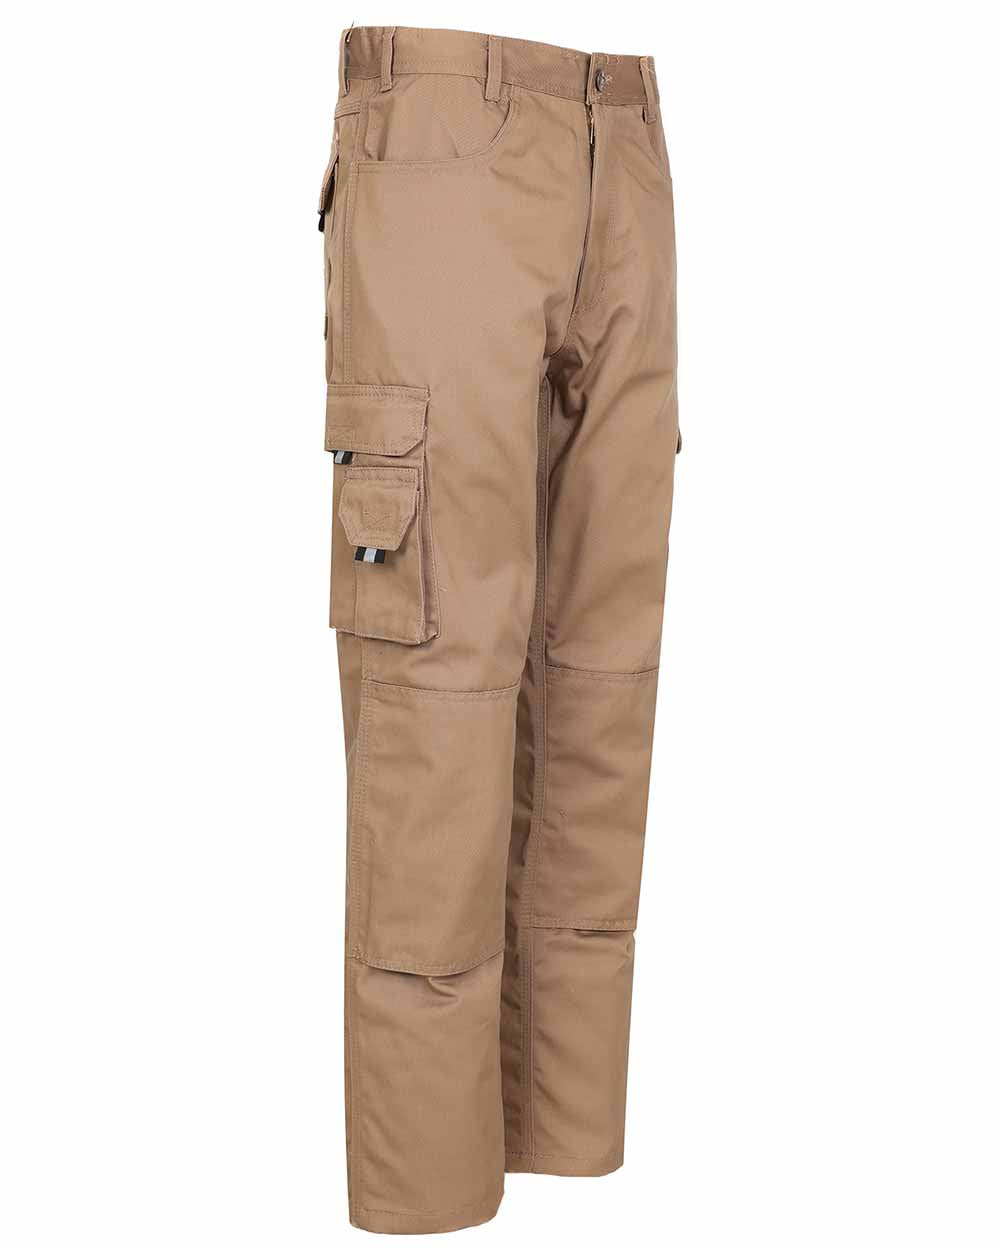 Side view with cargo pockets TuffStuff Pro Work Trousers in Stone 